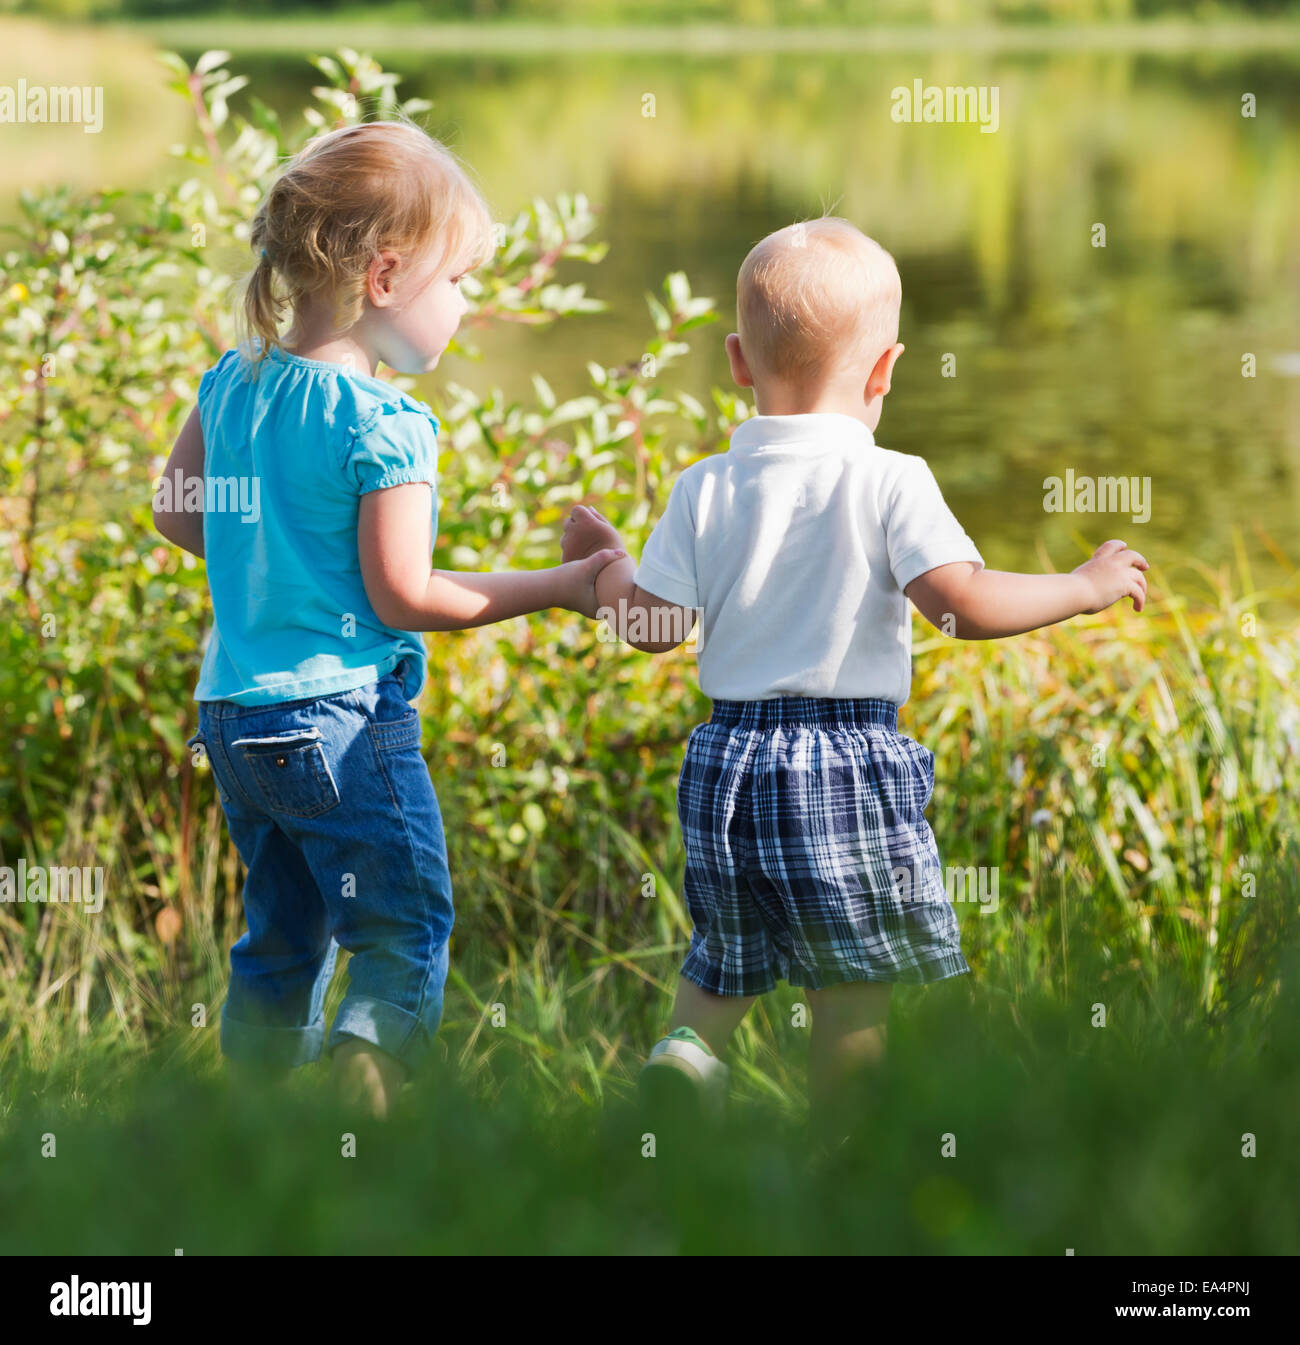 Young brother and sister walking together on shore; Edmonton, Alberta, Canada Stock Photo